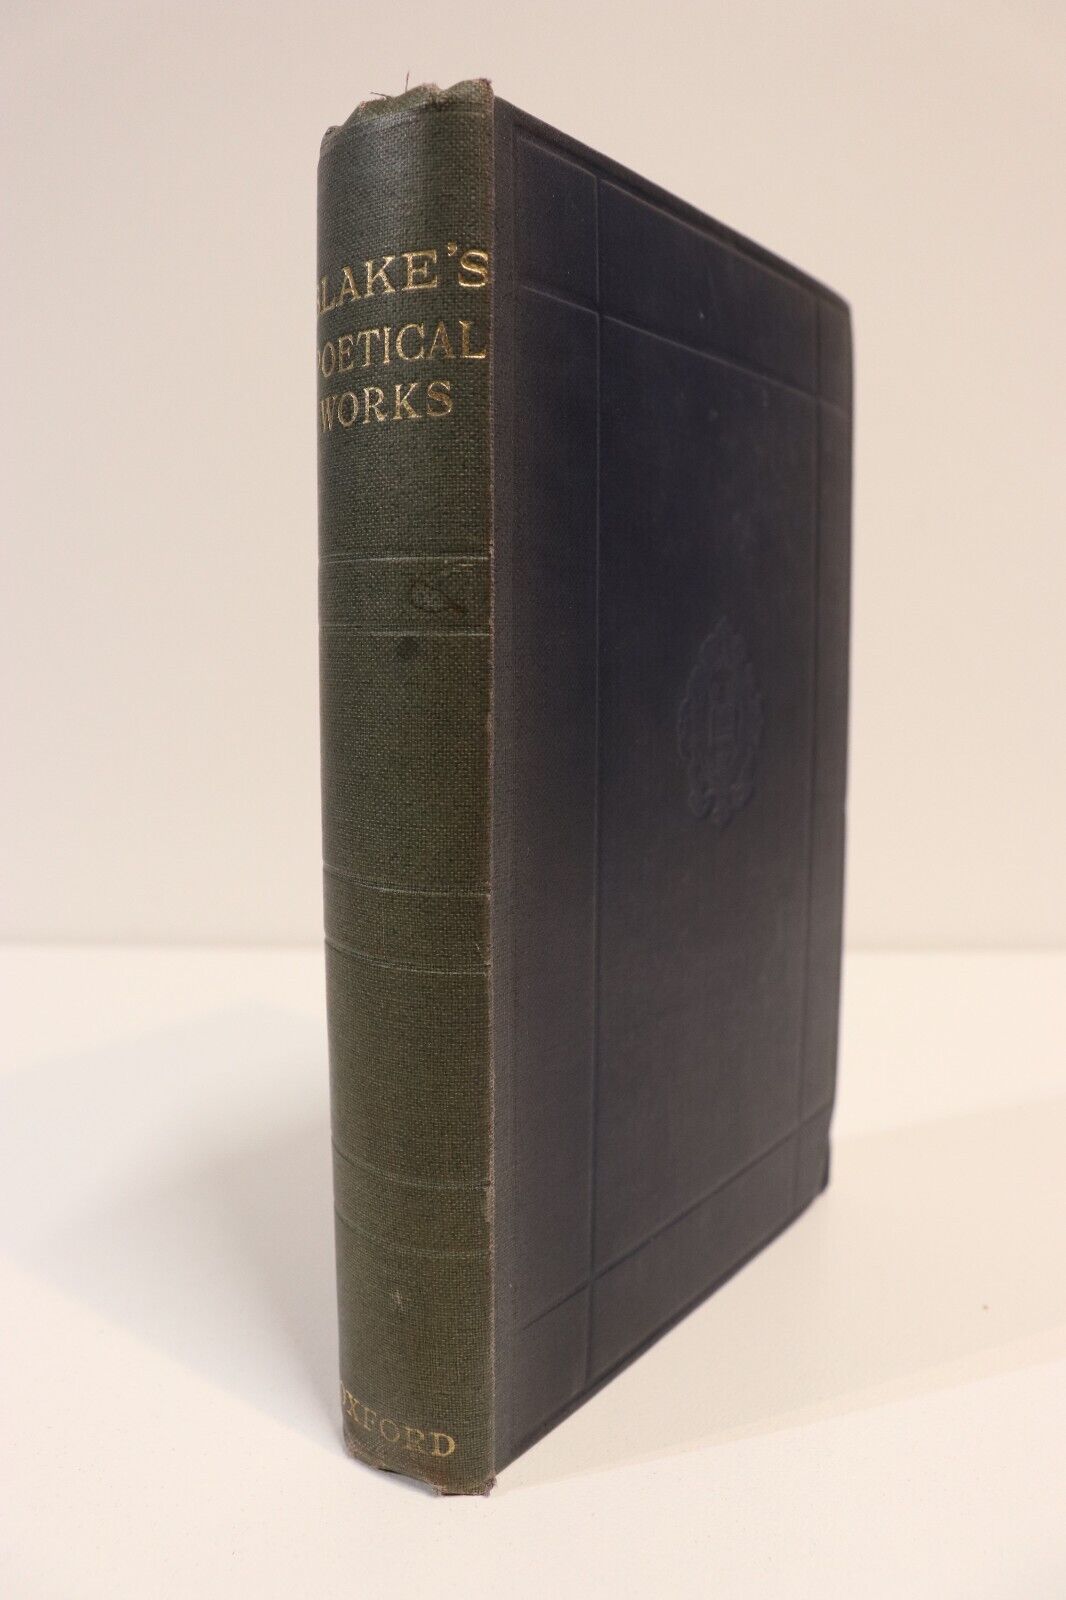 The Poetical Works Of William Blake - 1943 - Antique Poetry Book